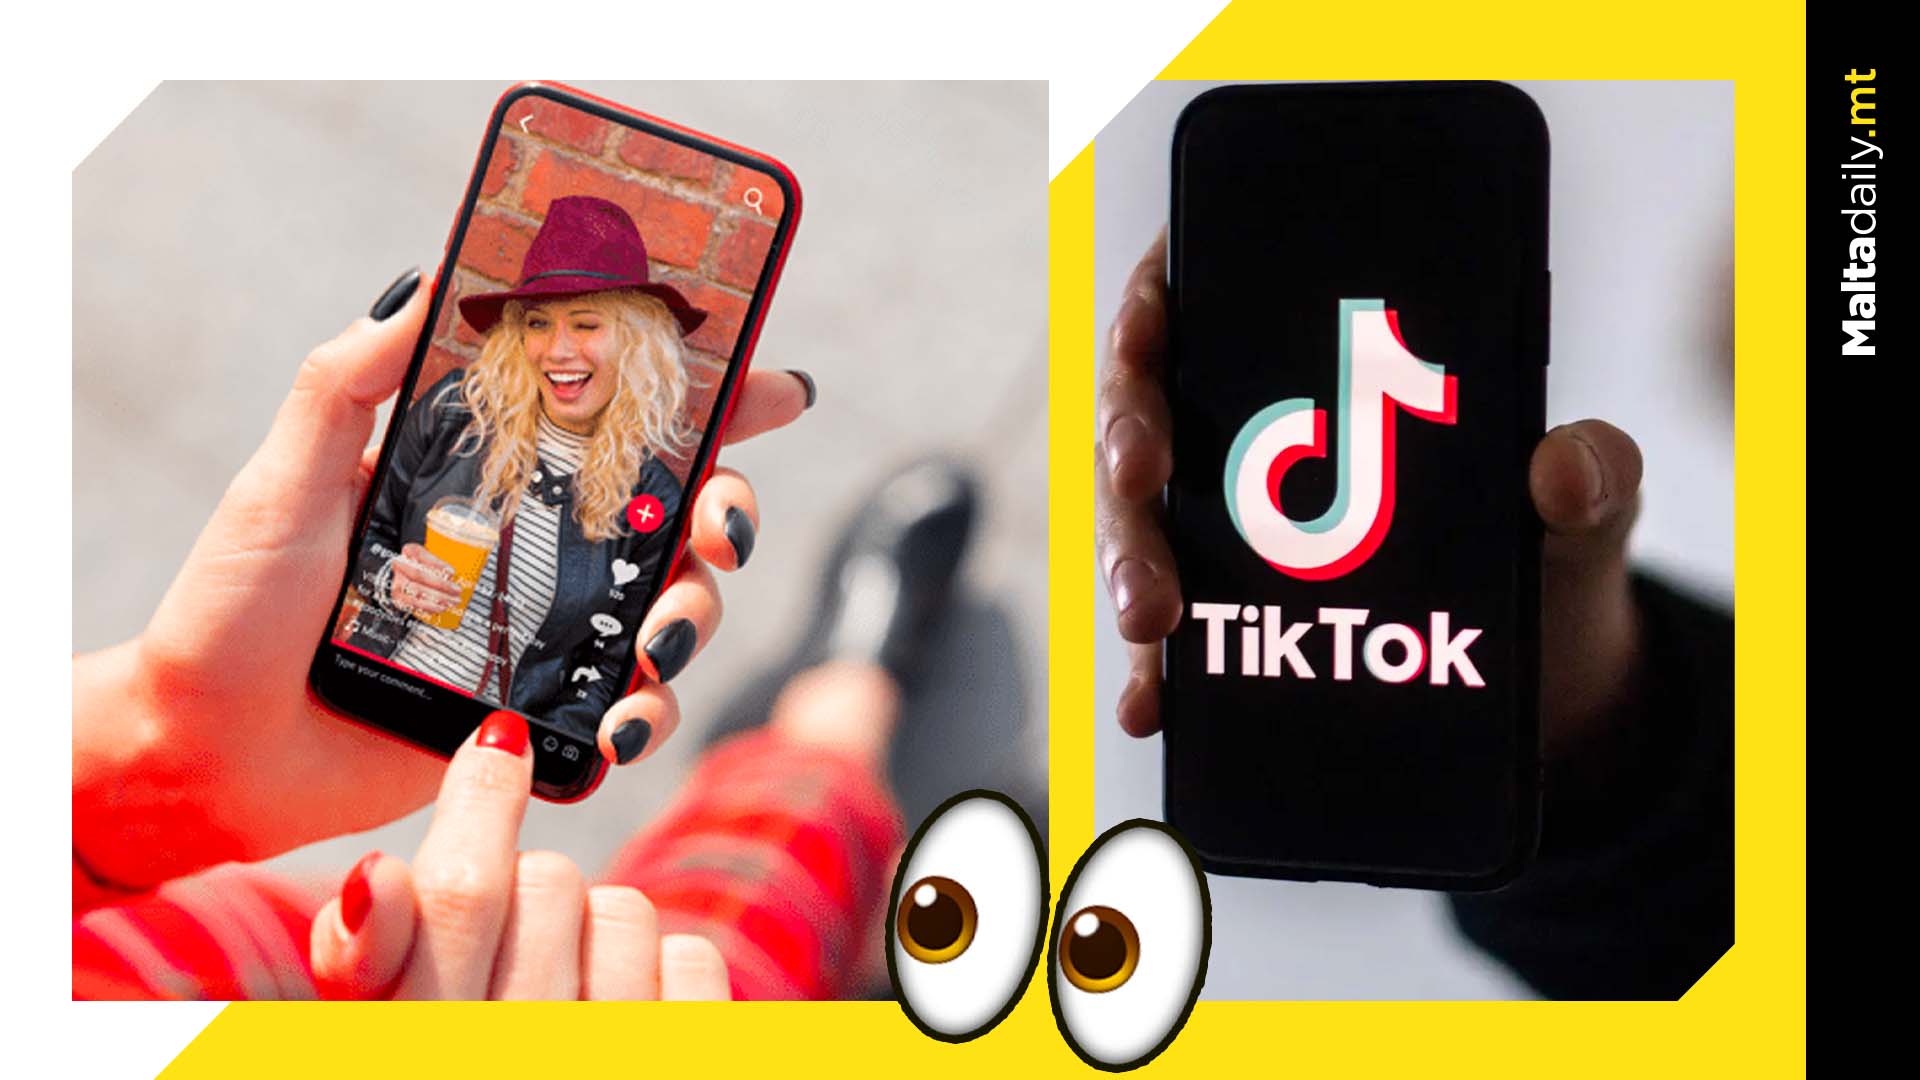 TikTok reveals employees can decide which videos go viral